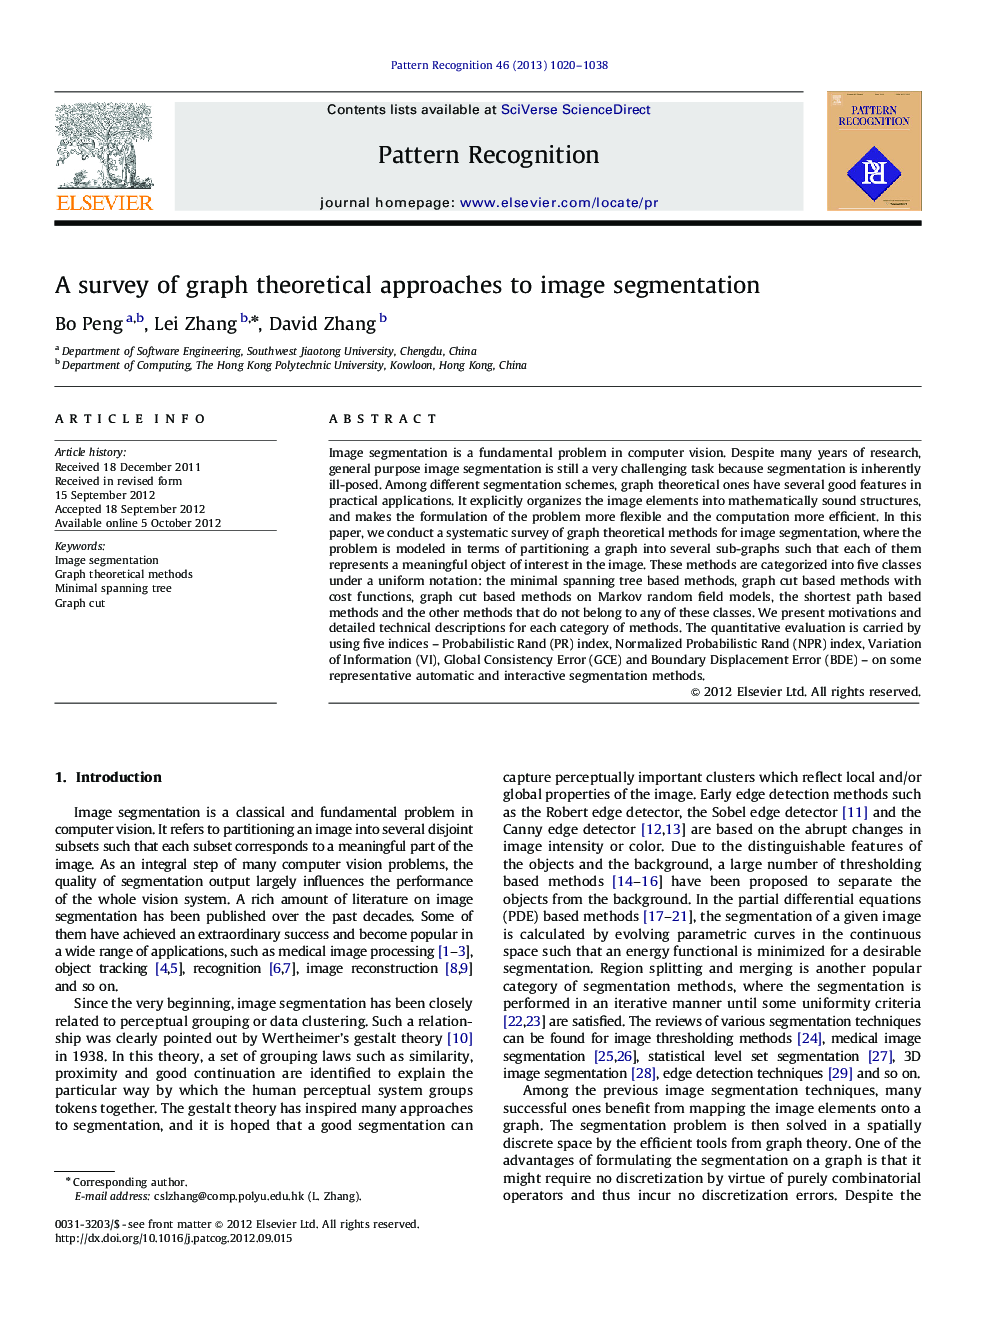 A survey of graph theoretical approaches to image segmentation